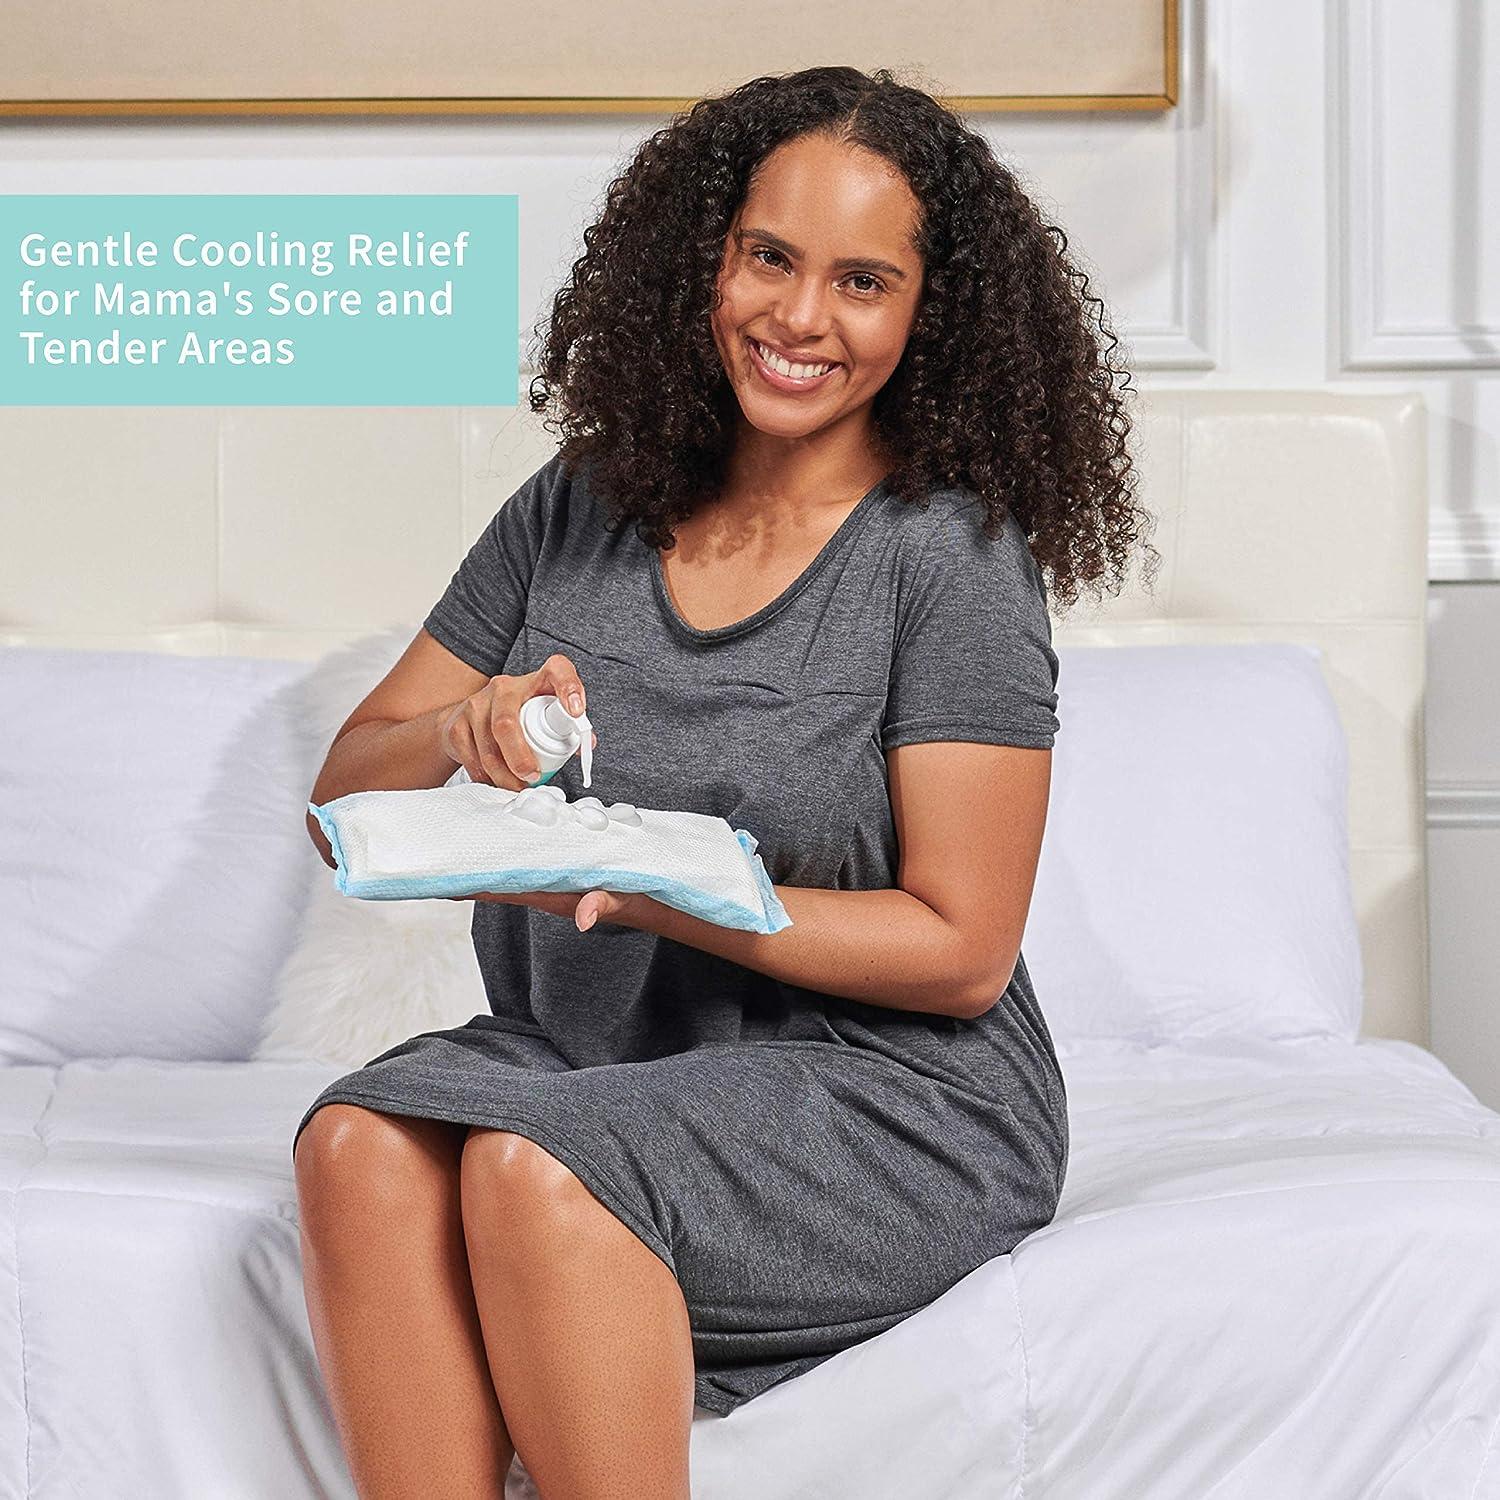 Mama & Wish Postpartum Recovery Kit - Includes Peri Bottle, Comfy Garments  & Essentials for Women After Birth, delivery kit